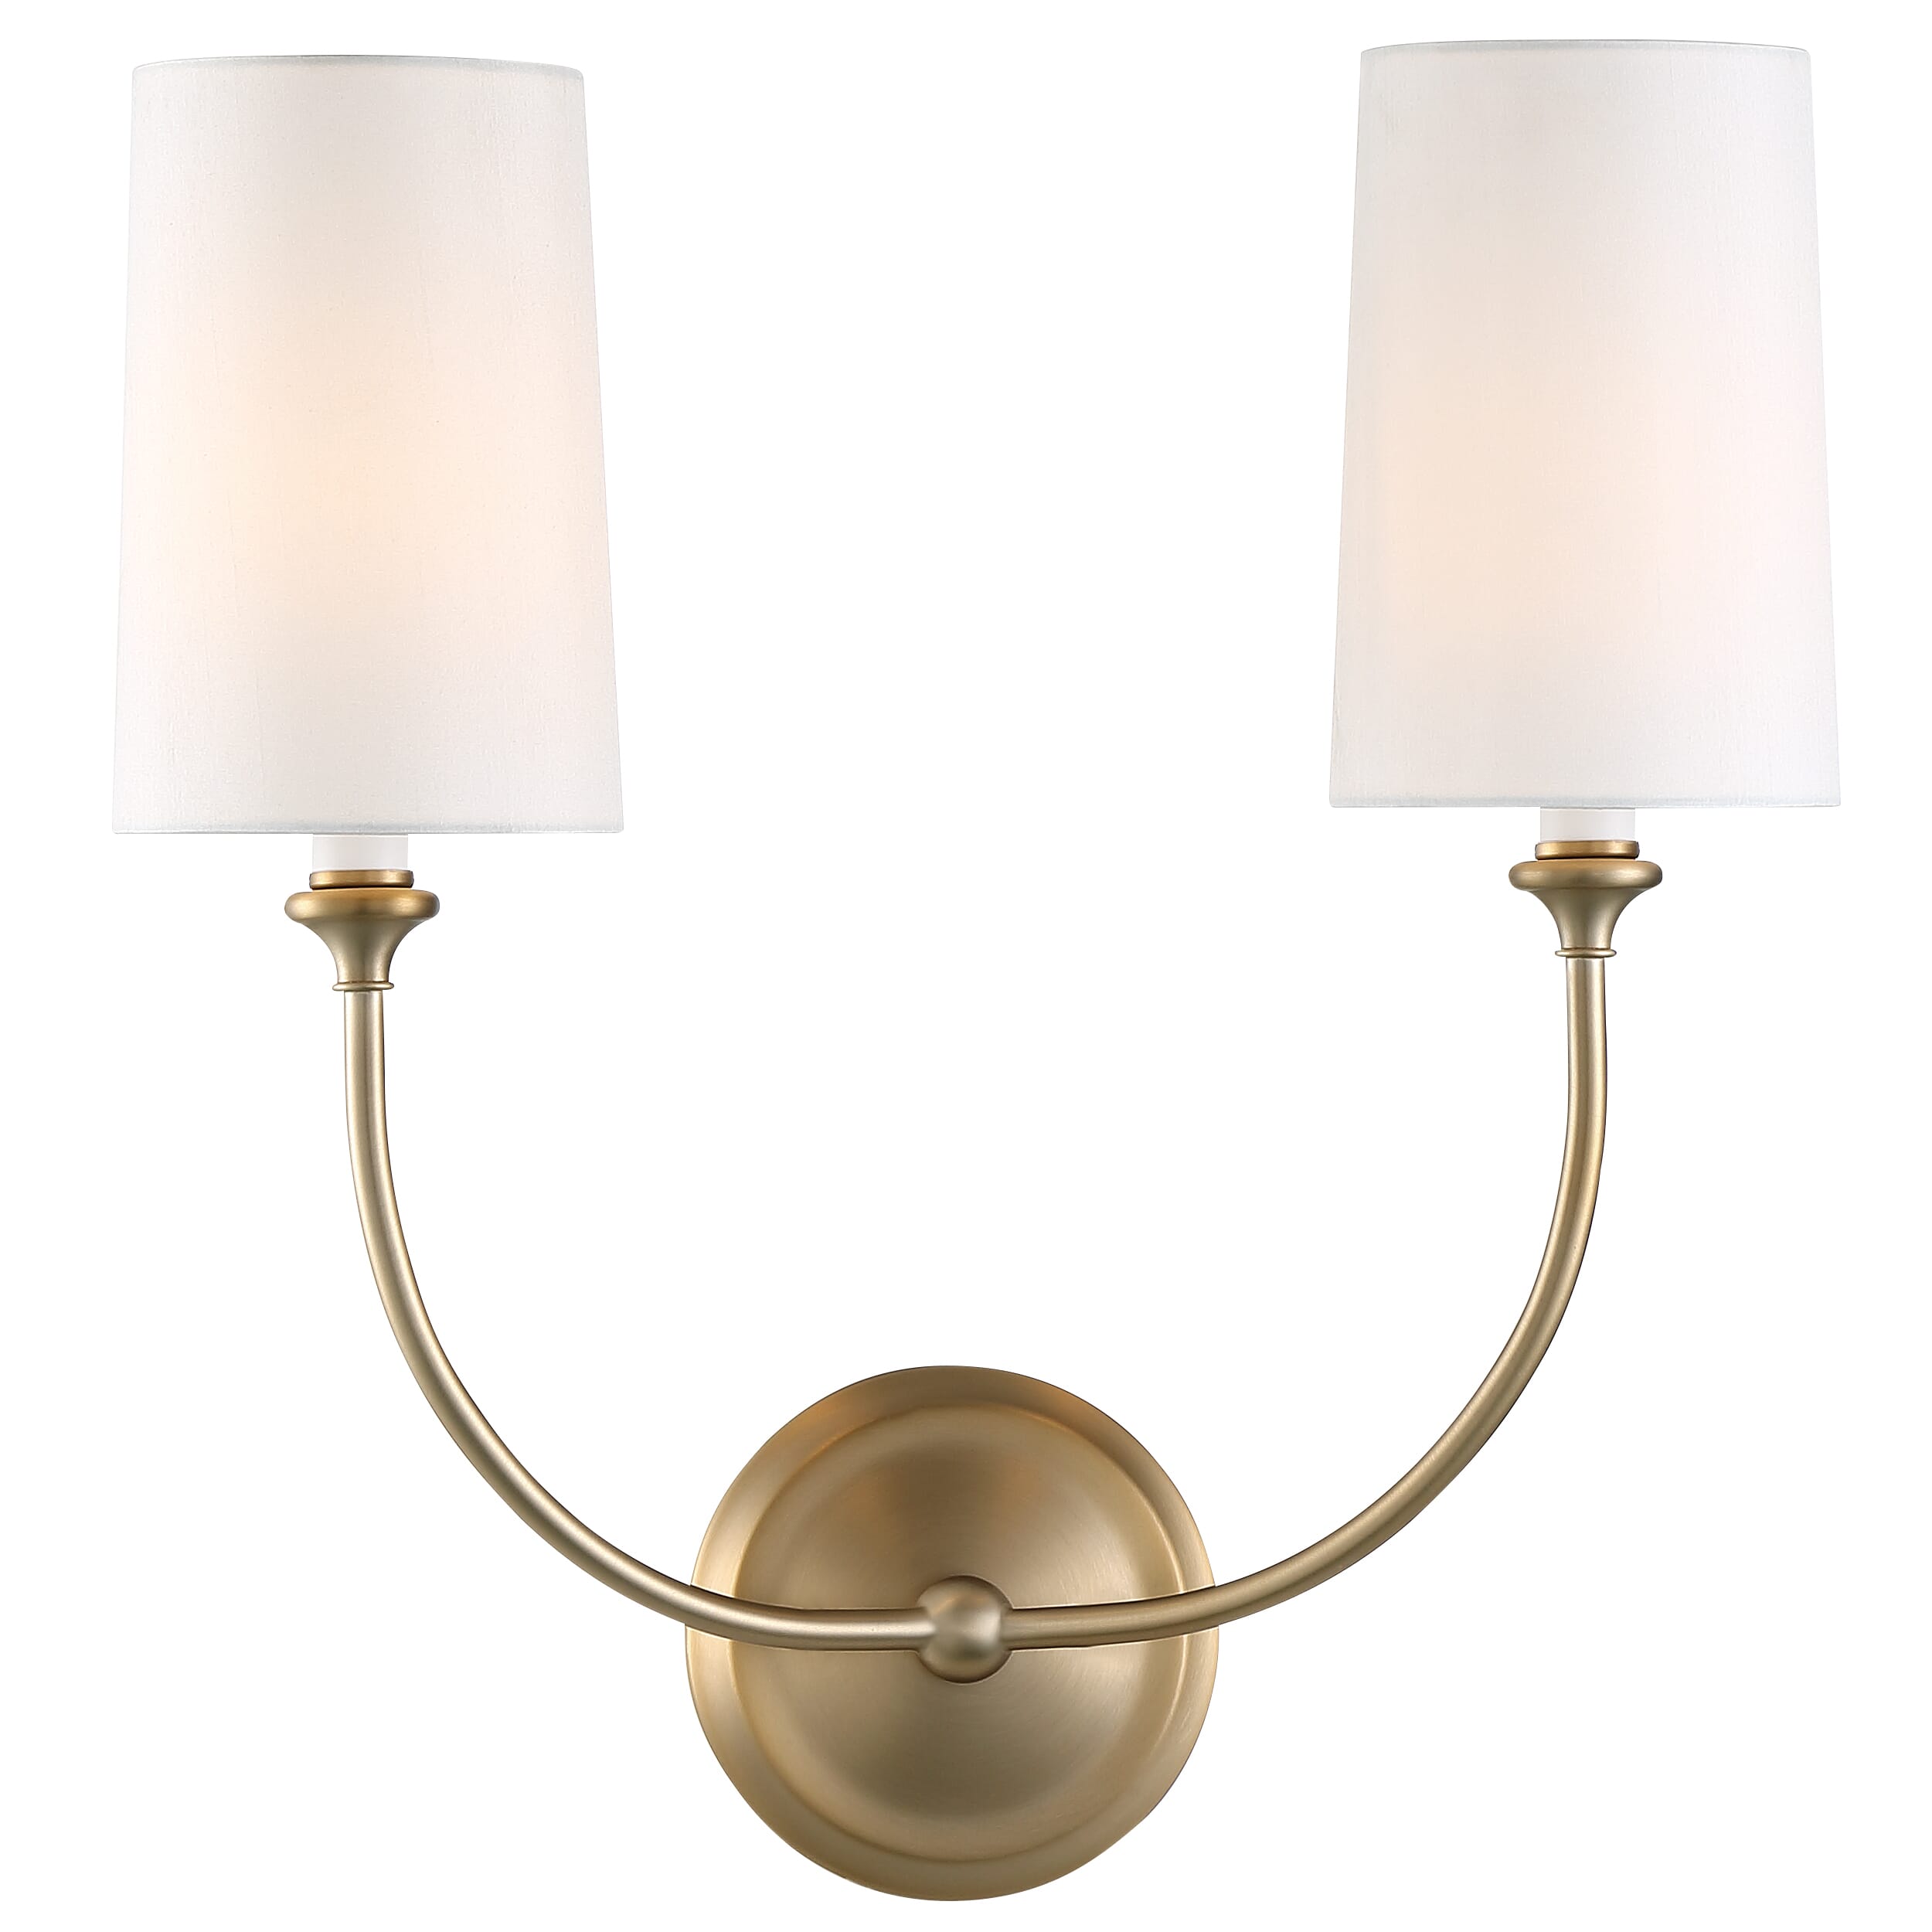 Libby Langdon for Sylvan 16" Wall Sconce in Vibrant Gold